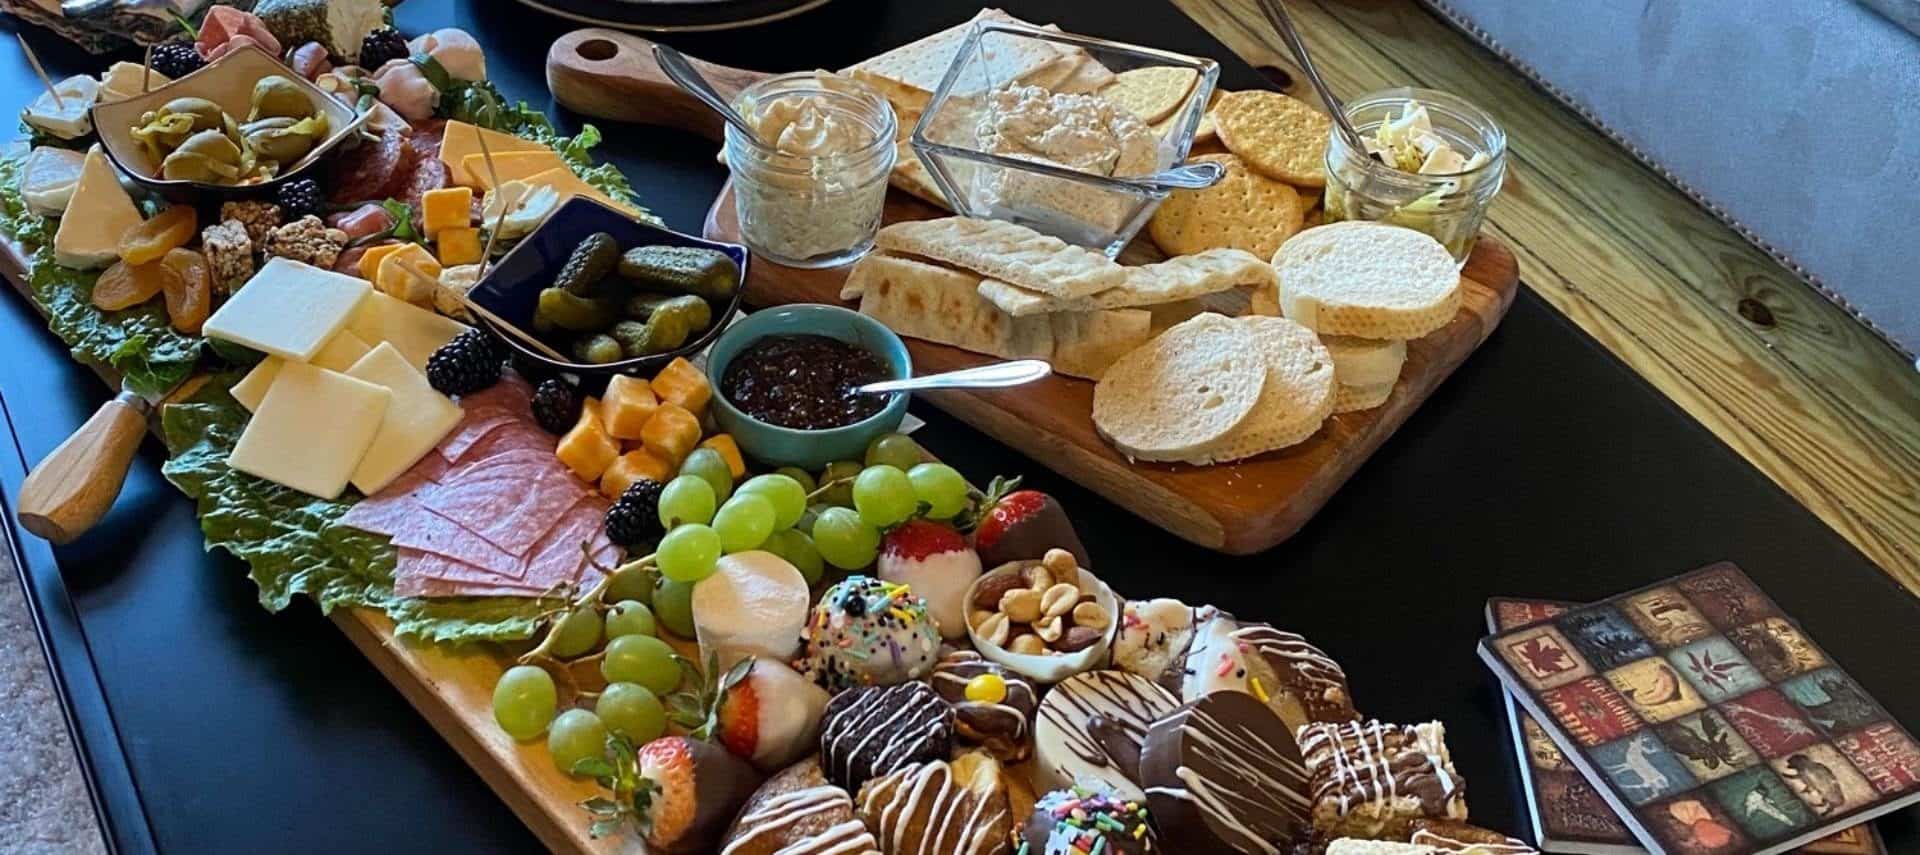 Large charcuterie boards filled with desserts, fruit, cheese, meat, pickles, crackers, and breads